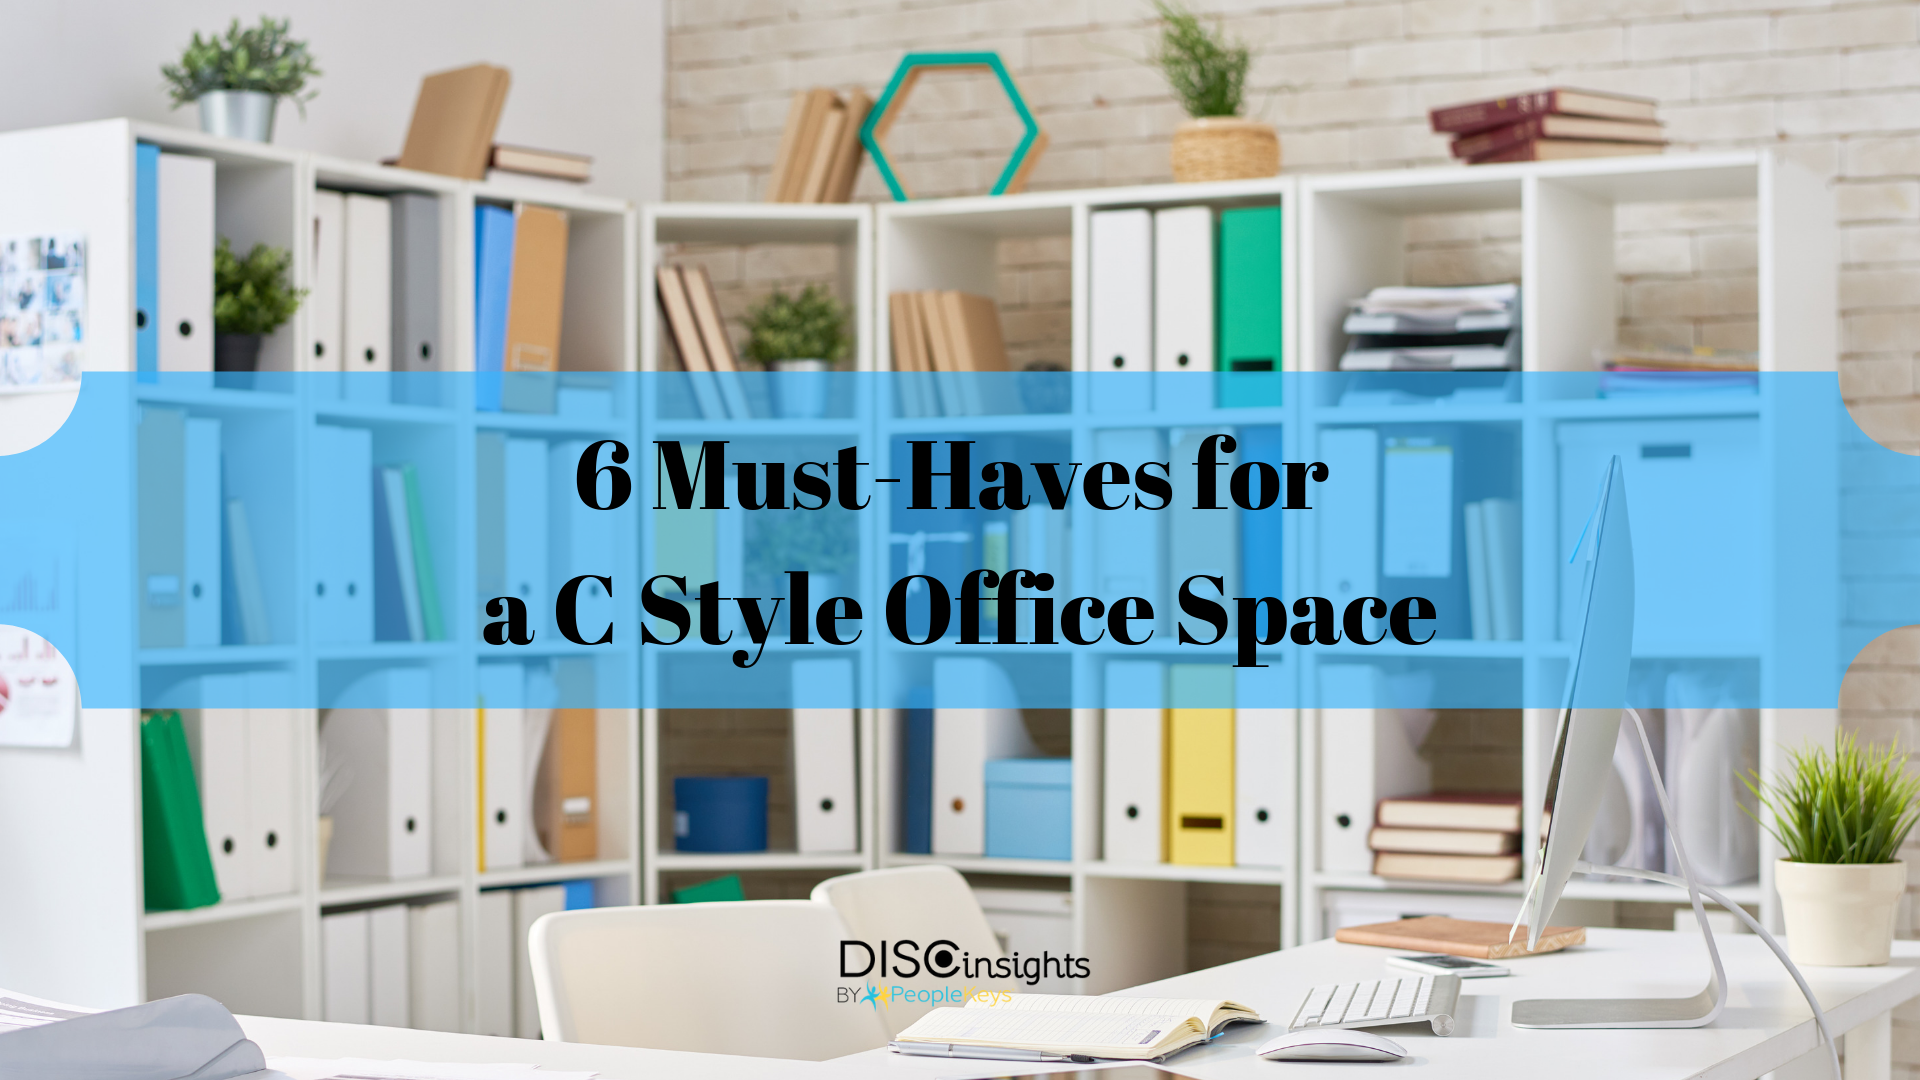 6 Must-Haves for a C Style Office Space